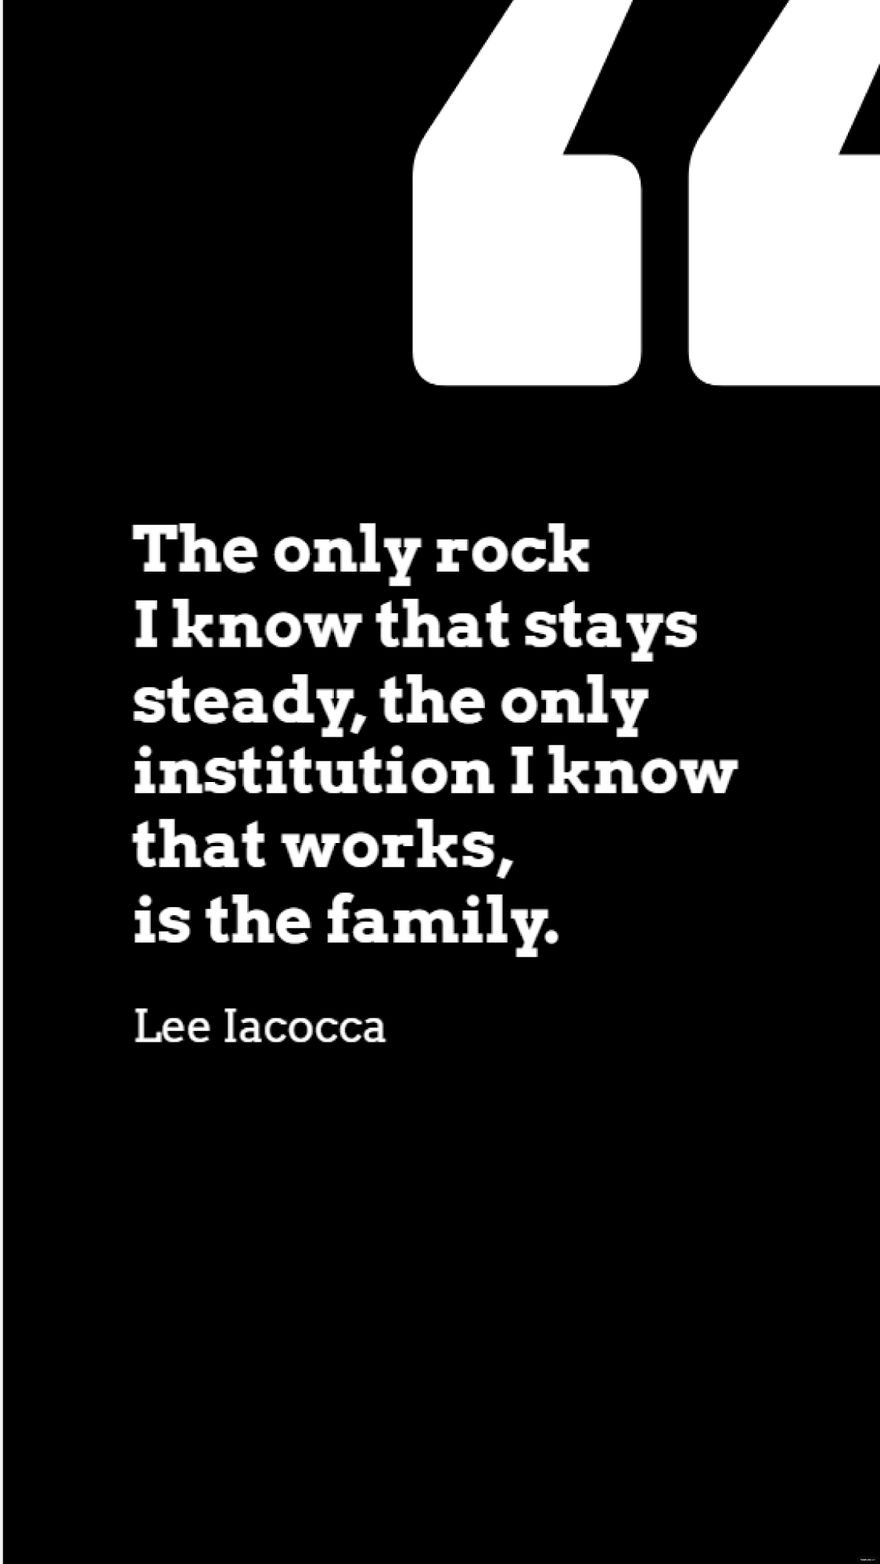 Free Lee Iacocca - The only rock I know that stays steady, the only institution I know that works, is the family.